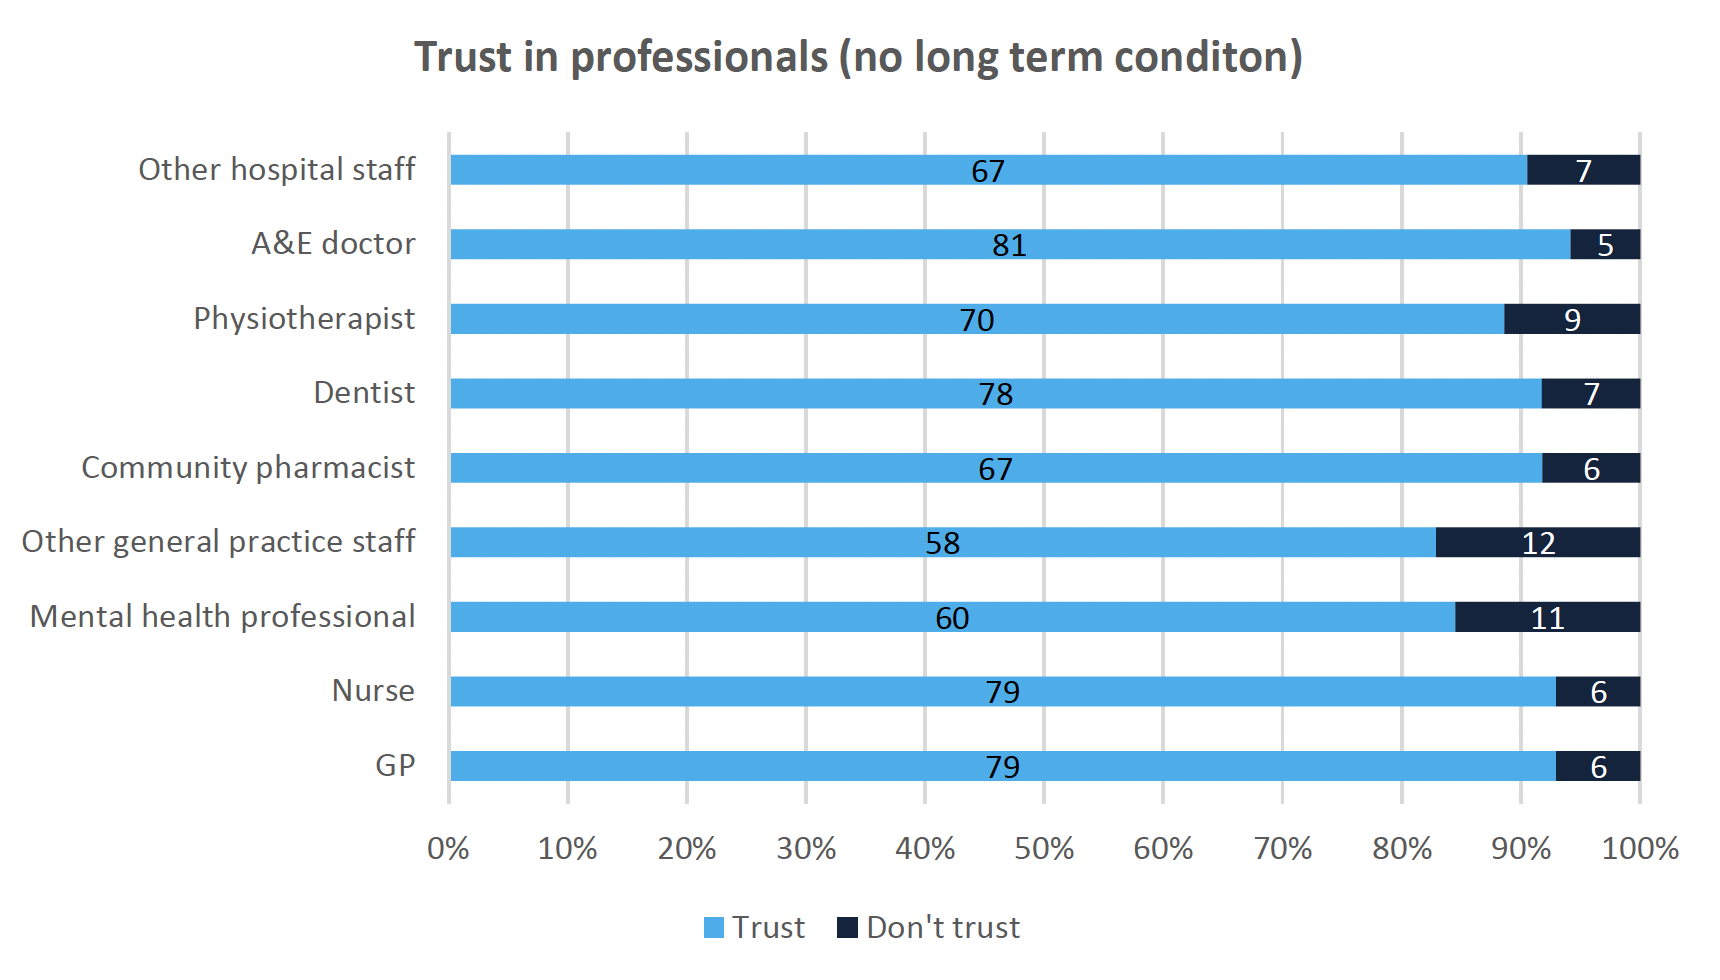 Stacked horizontal graphing showing Trust in professionals for those with no long term condition
This stacked horizontal graph shows respondents with no long term condition trust in health care professionals. The graph shows 79% of respondents trust their Nurse and their GP. The least amount of trust was shown for Other general practice staff, where 58% of respondents with no long term condition trusted them.